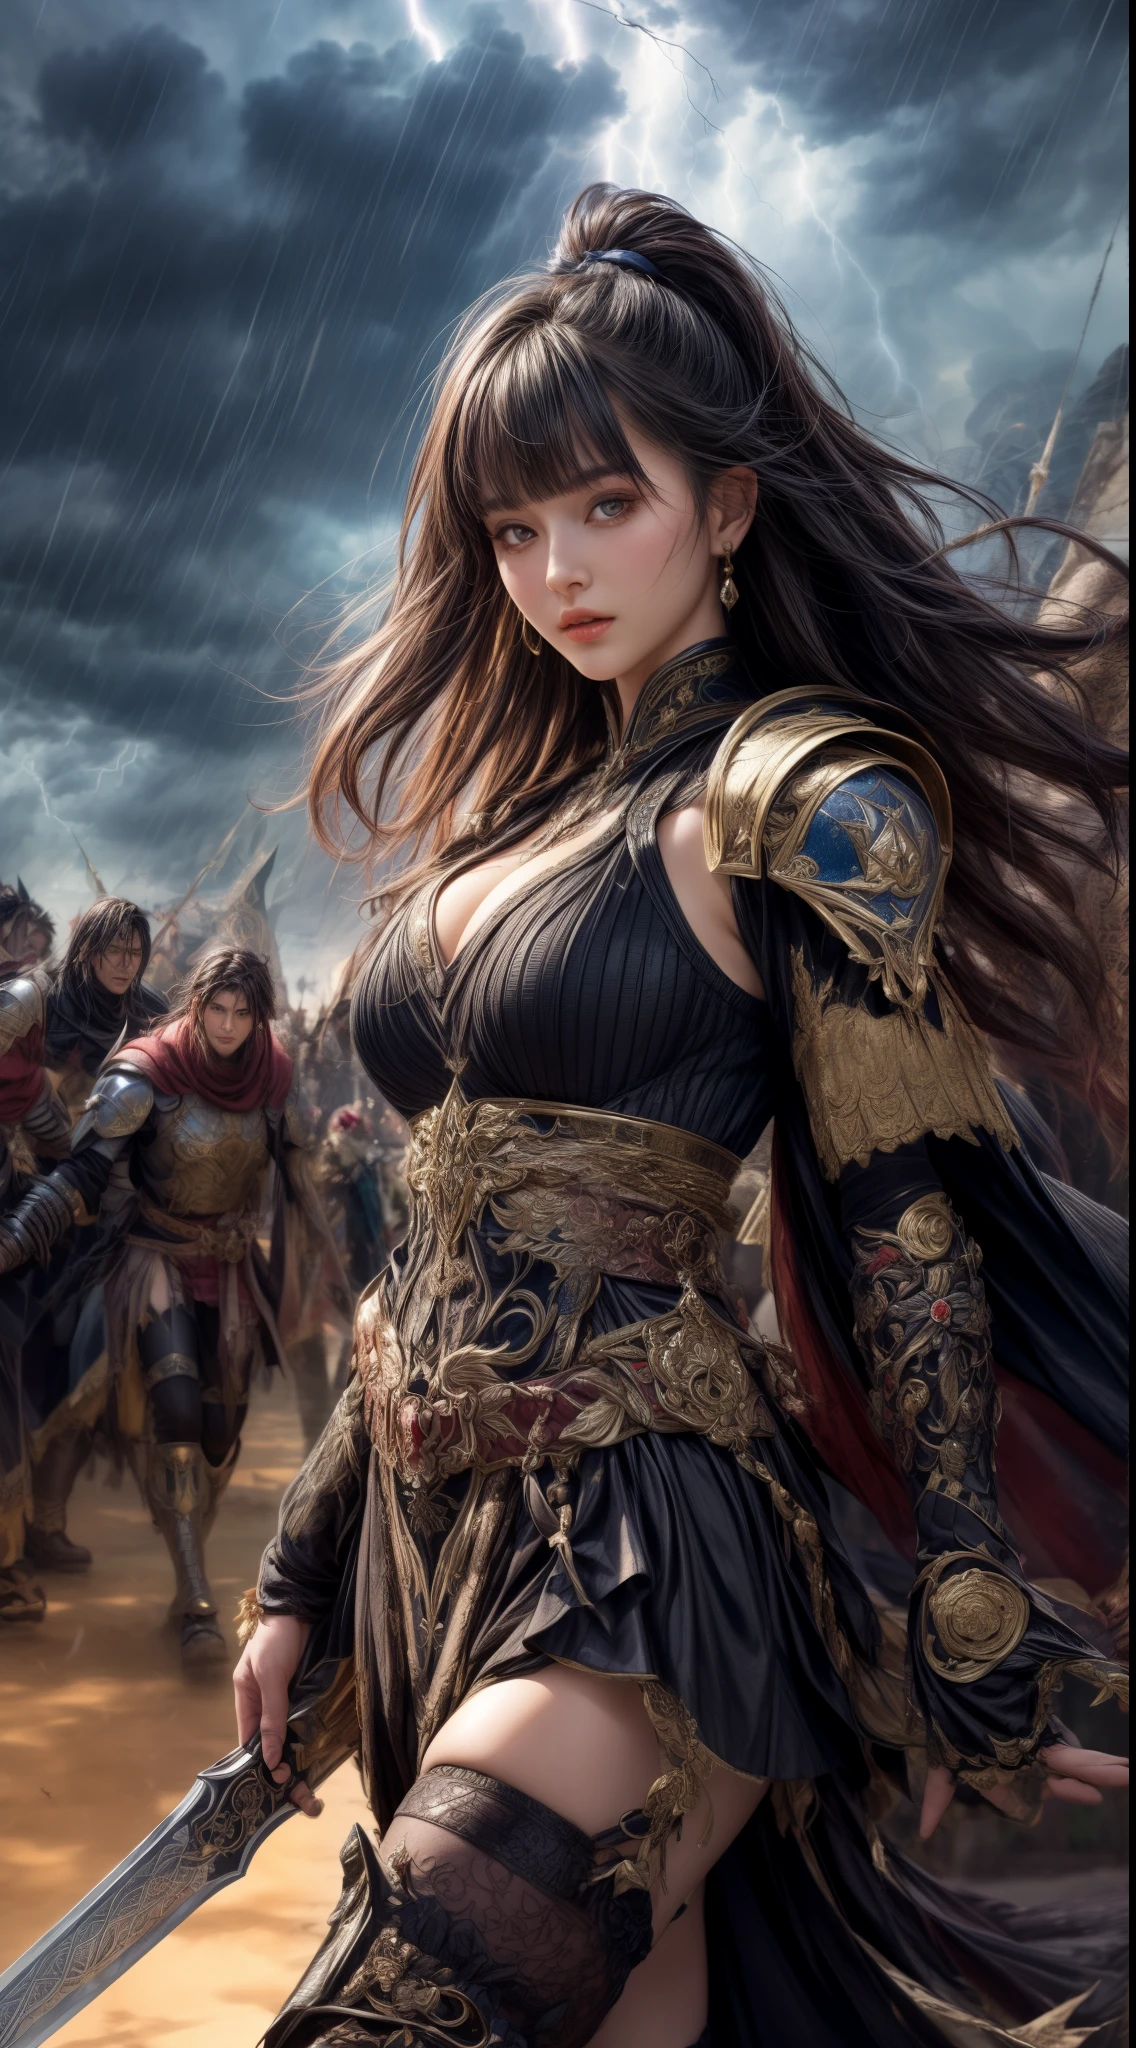 Cowboy Shot、Very beautiful woman、Slender women、(Detailed face)、Realistic Skin、((Demon Knight)), (Black Armor)、((((Black armor with very fine and intricate decoration))))、((Delicate photo))，(Girl Astepeace RAW Photo Details:1.25), (highest quality:1.6), (超A high resolution:1.5), (Realistic:1.75), 8K resolution, Canon EOS R5, 50mm, Absurd, Ultra-detailed,Cinema Lighting,Battlefields of Medieval Europe、((battle))、RPG World、Final Fantasy、(((Embellished skirt)))、Thigh-high socks、Shin Guards、night、((Long hair with bangs,))、Get six-pack、Torn Cloak、Beautiful Armor、(((Giant Sword)))、In combat、The wind is blowing、((Asymmetrical Armor:1.5))、(((thunderstorm)))、((Knight Commander))、(((Leading a large group of black knights)))、Banner、Wolf Pattern:1.5